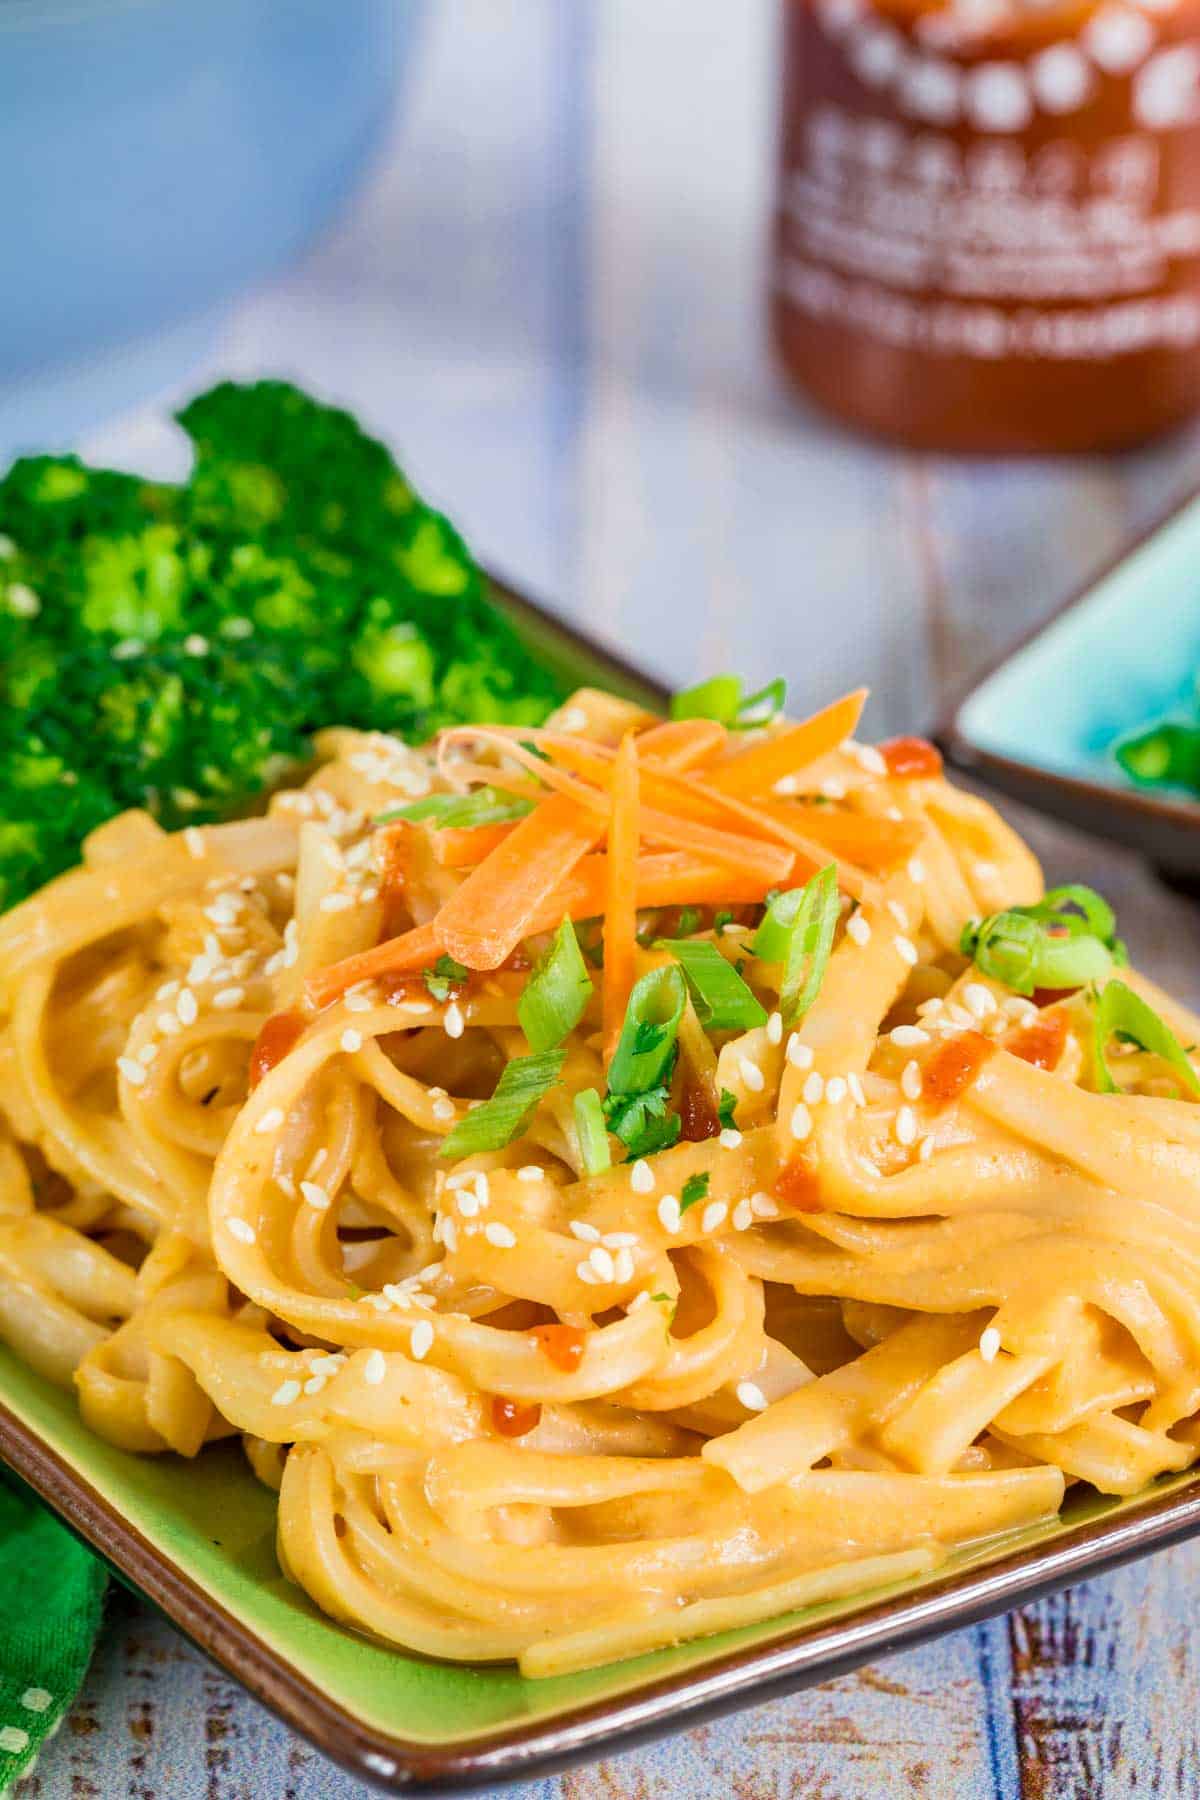 A serving of sesame noodles with broccoli on a rectangular plate garnished with sesame seeds and scallions.